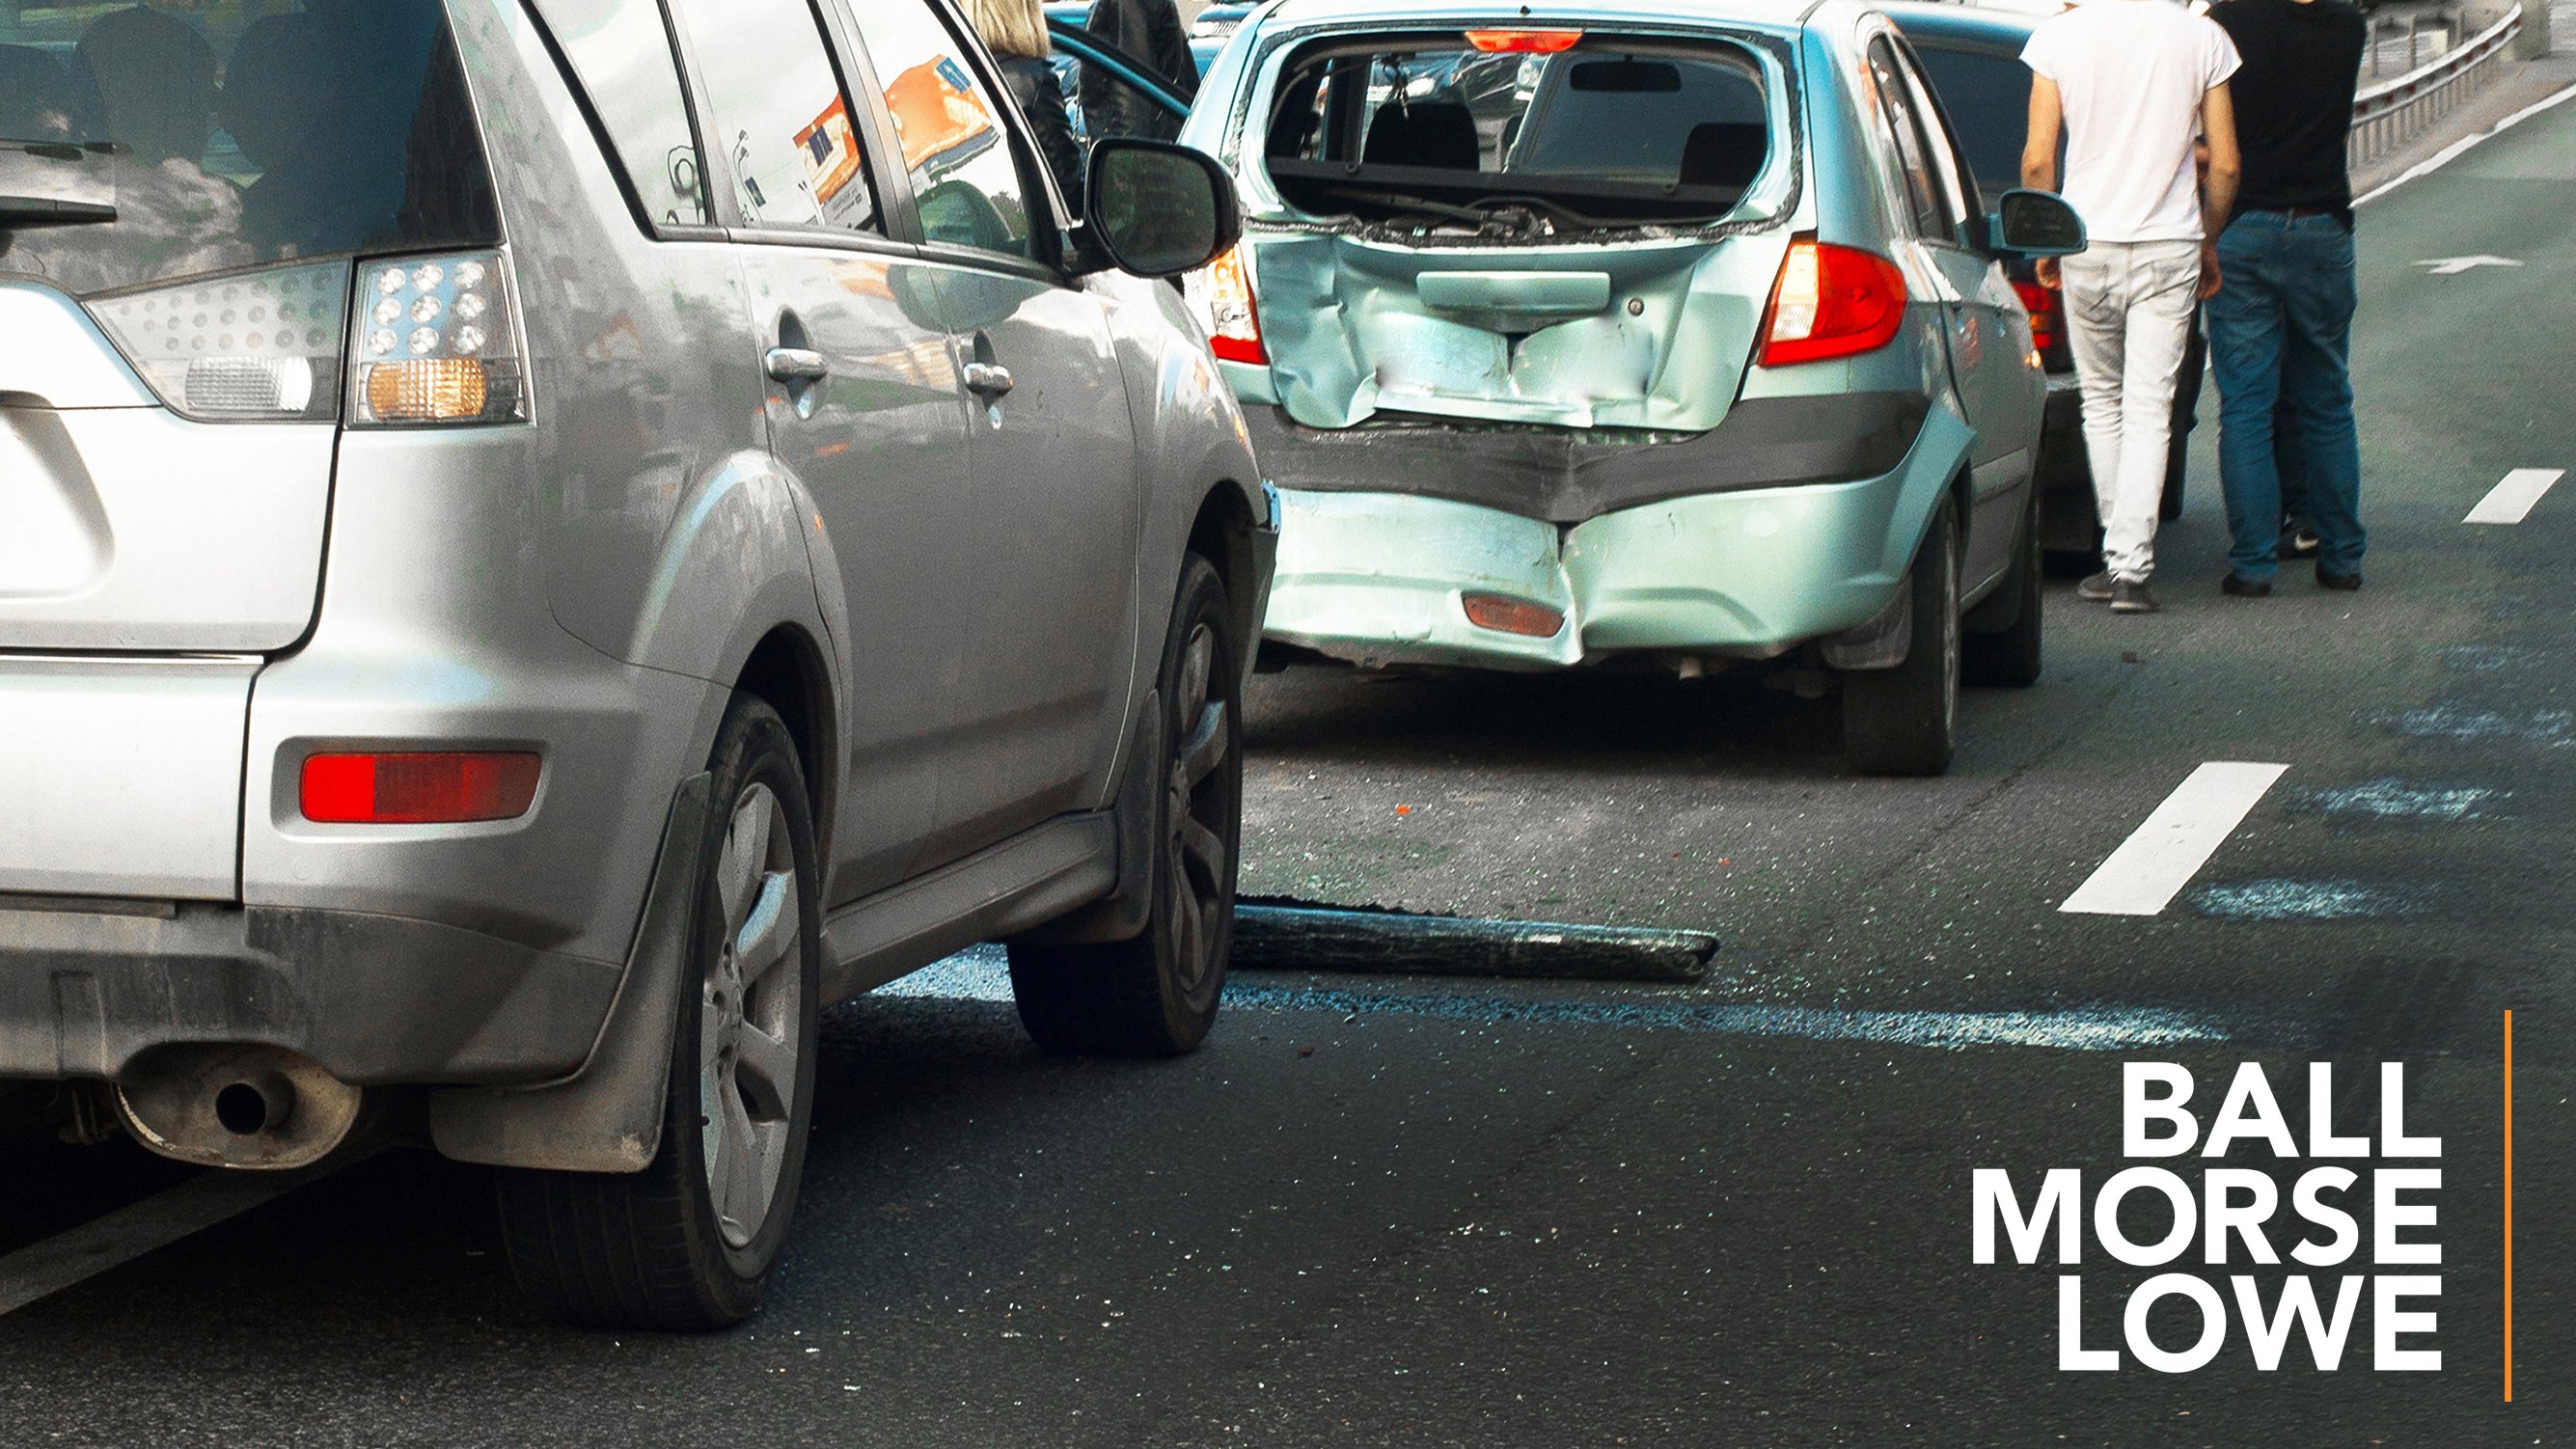 Multi-Vehicle accidents: who is at fault?